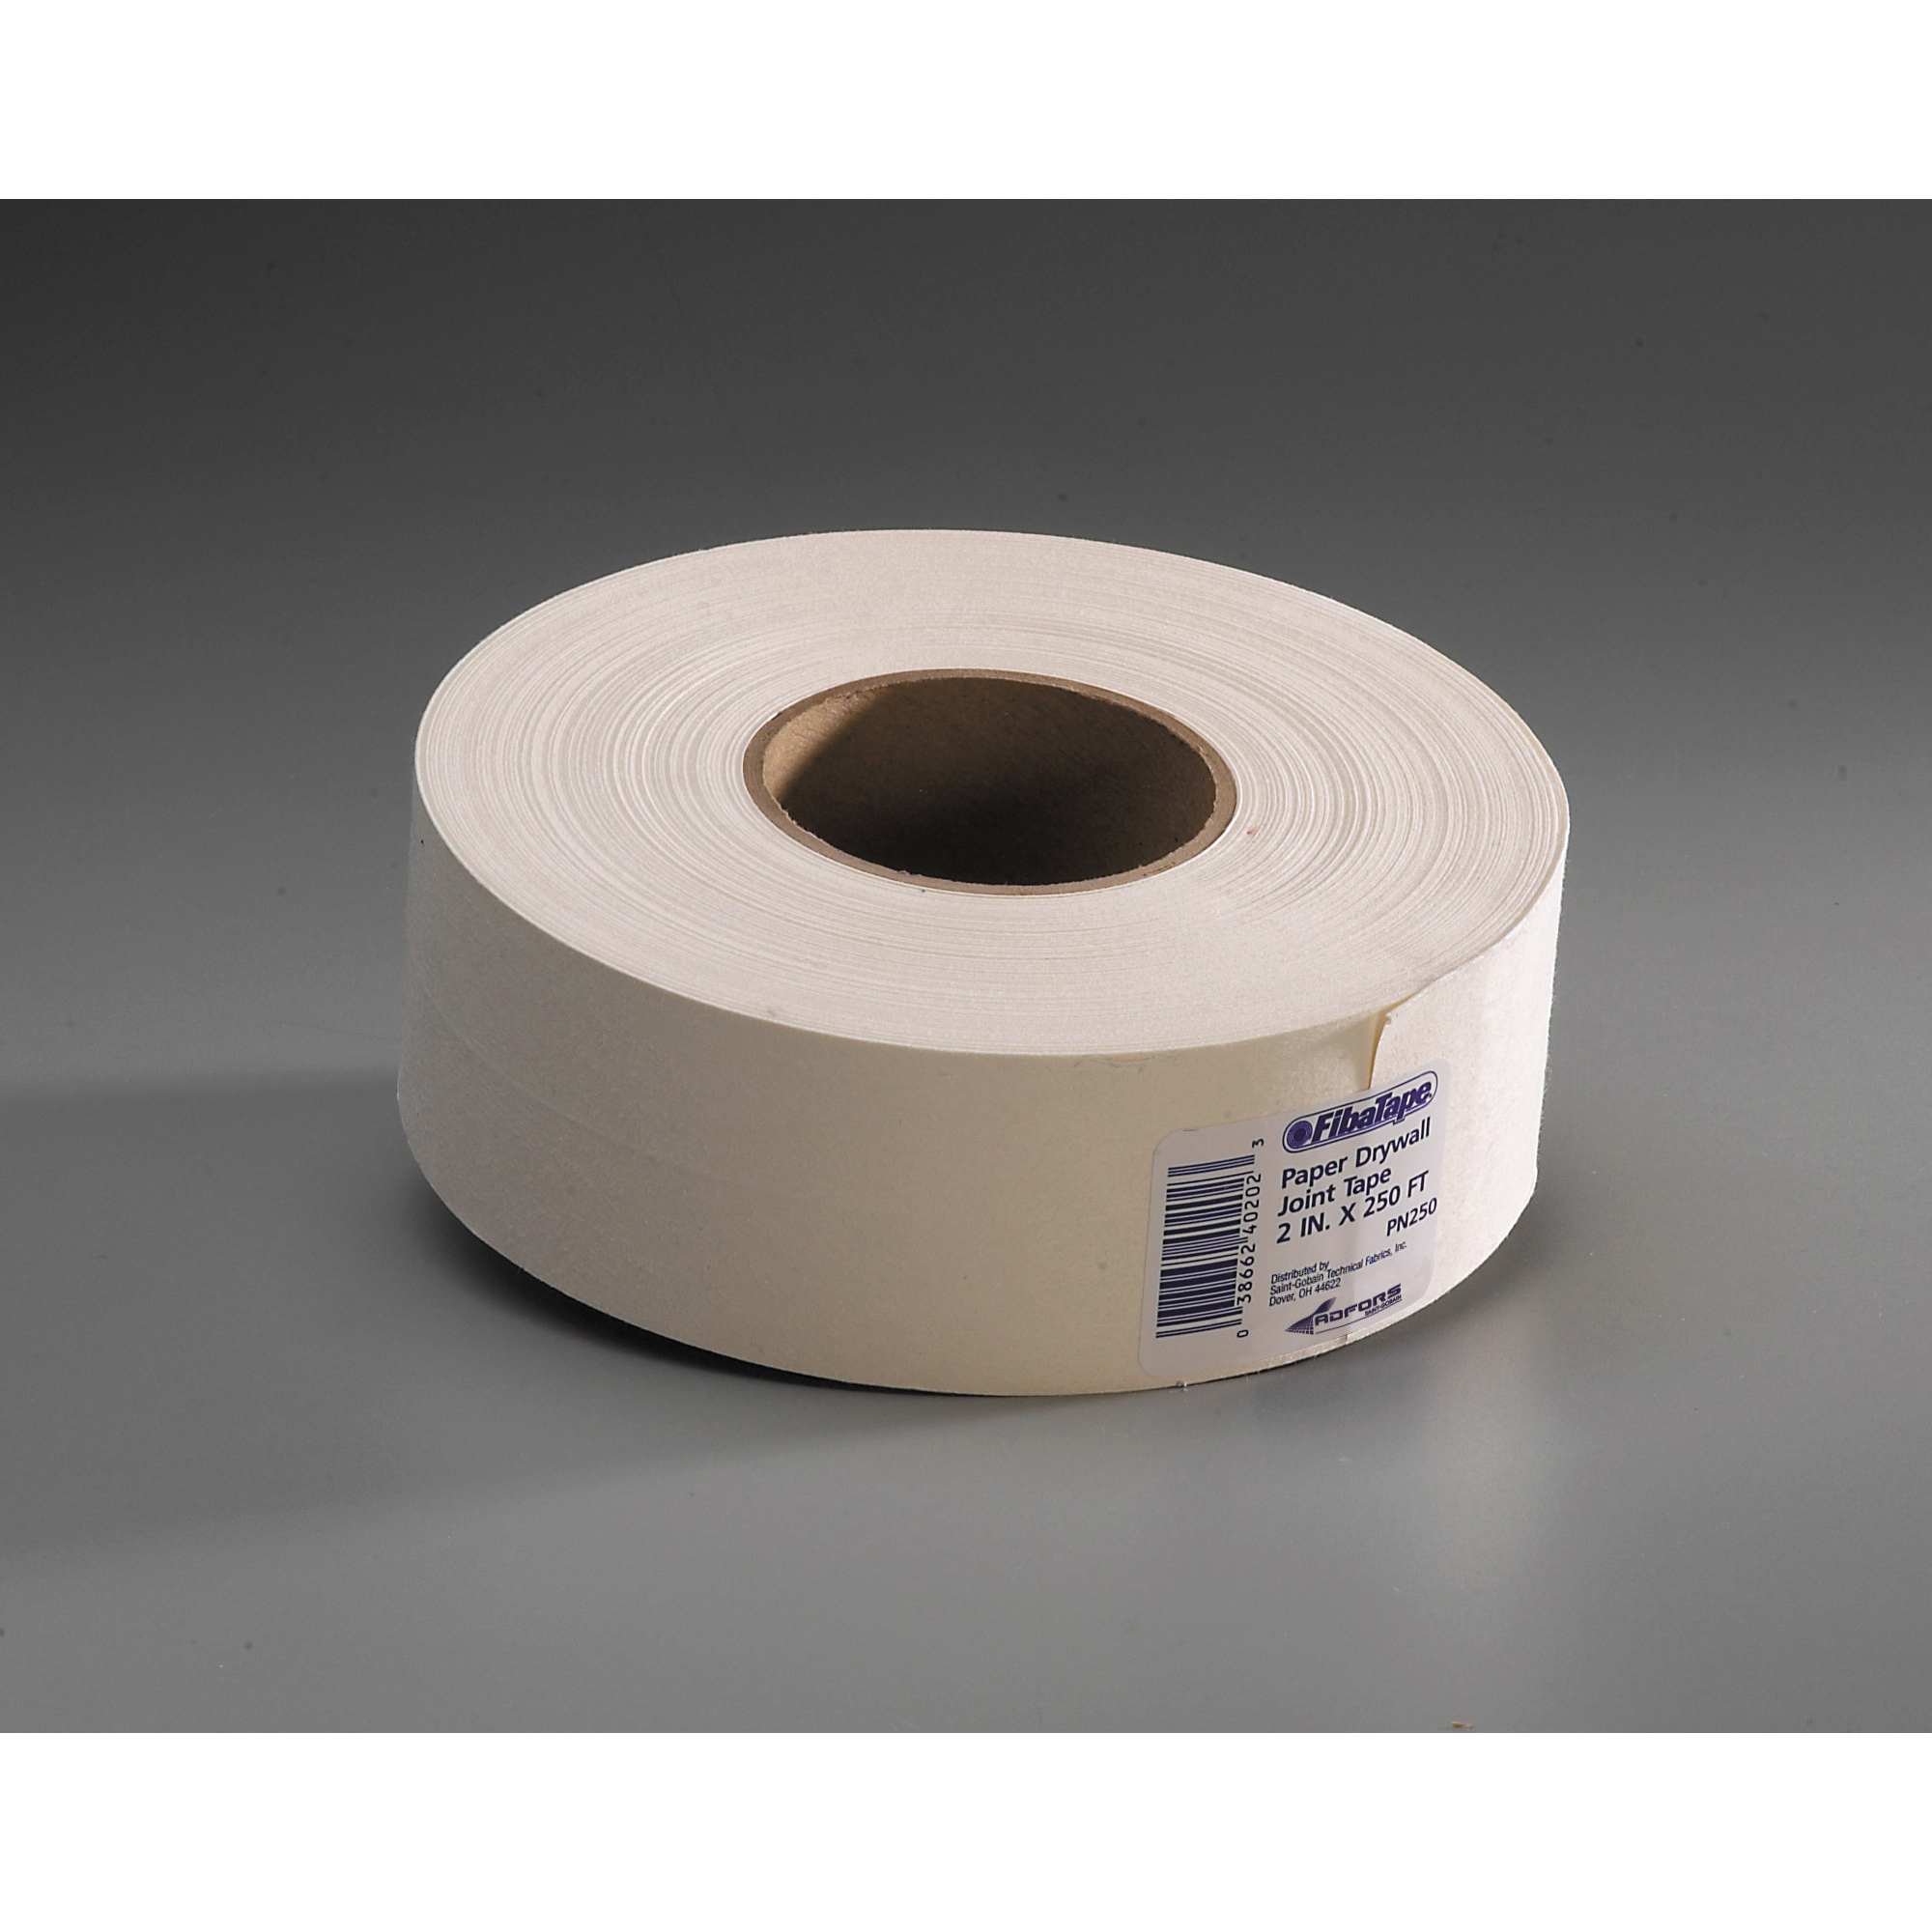 FDW6618-U Drywall Joint Tape, 250 ft L, 2 in W, White